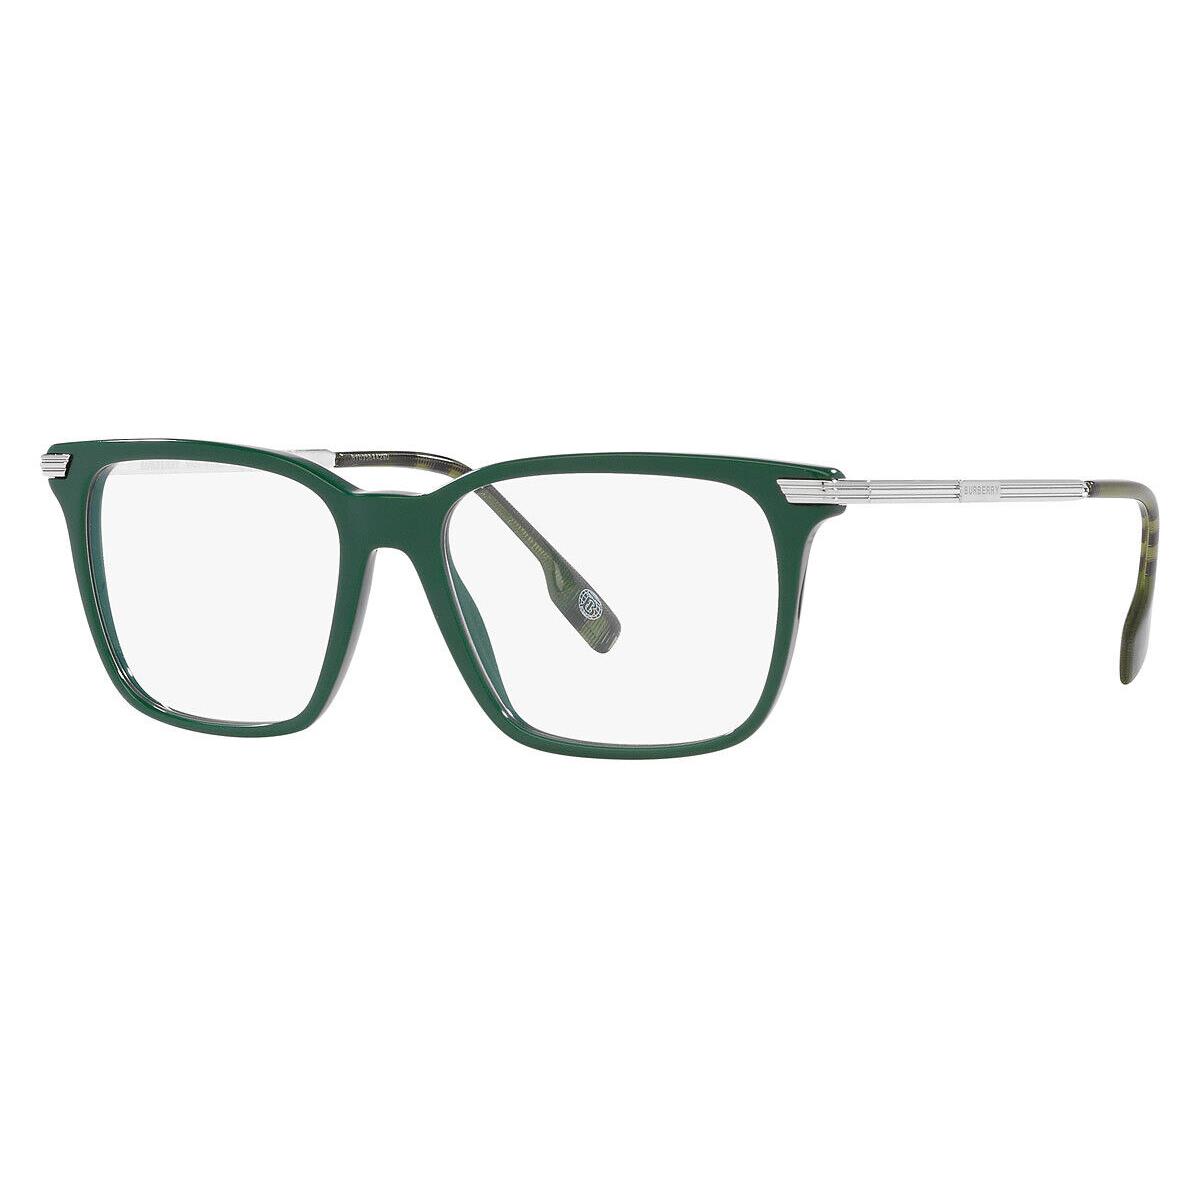 Burberry Ellis BE2378 Eyeglasses Green and Silver Square 53mm - Frame: Green and Silver, Lens: Demo